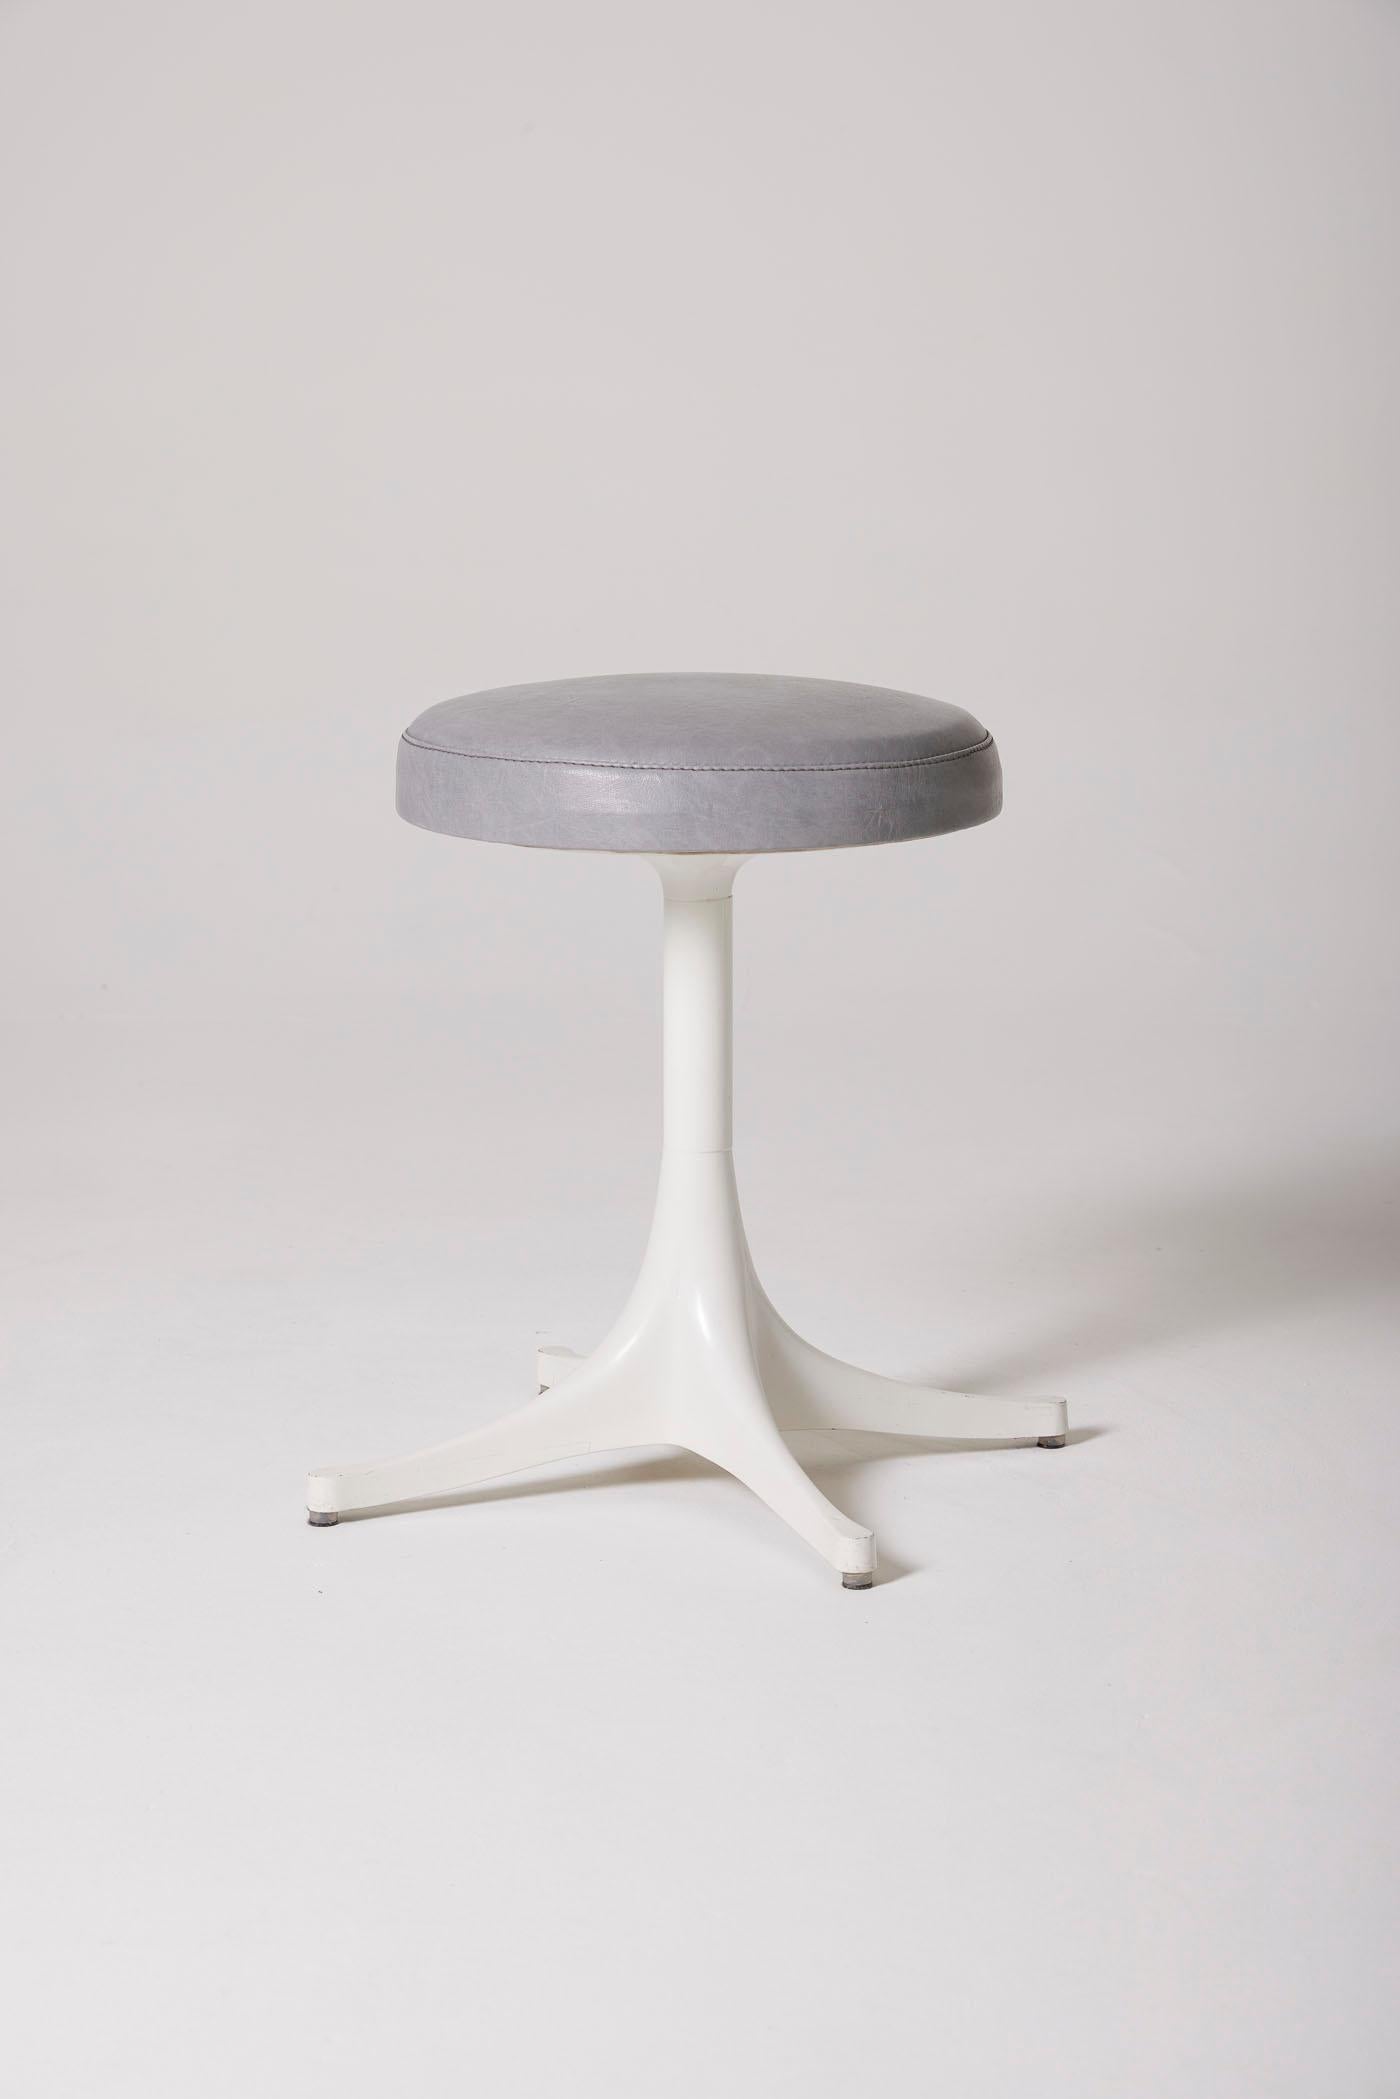 A stool by designer George Nelson for Herman Miller, 1960s. White lacquered metal base and gray leather seat. In perfect condition.
DV503